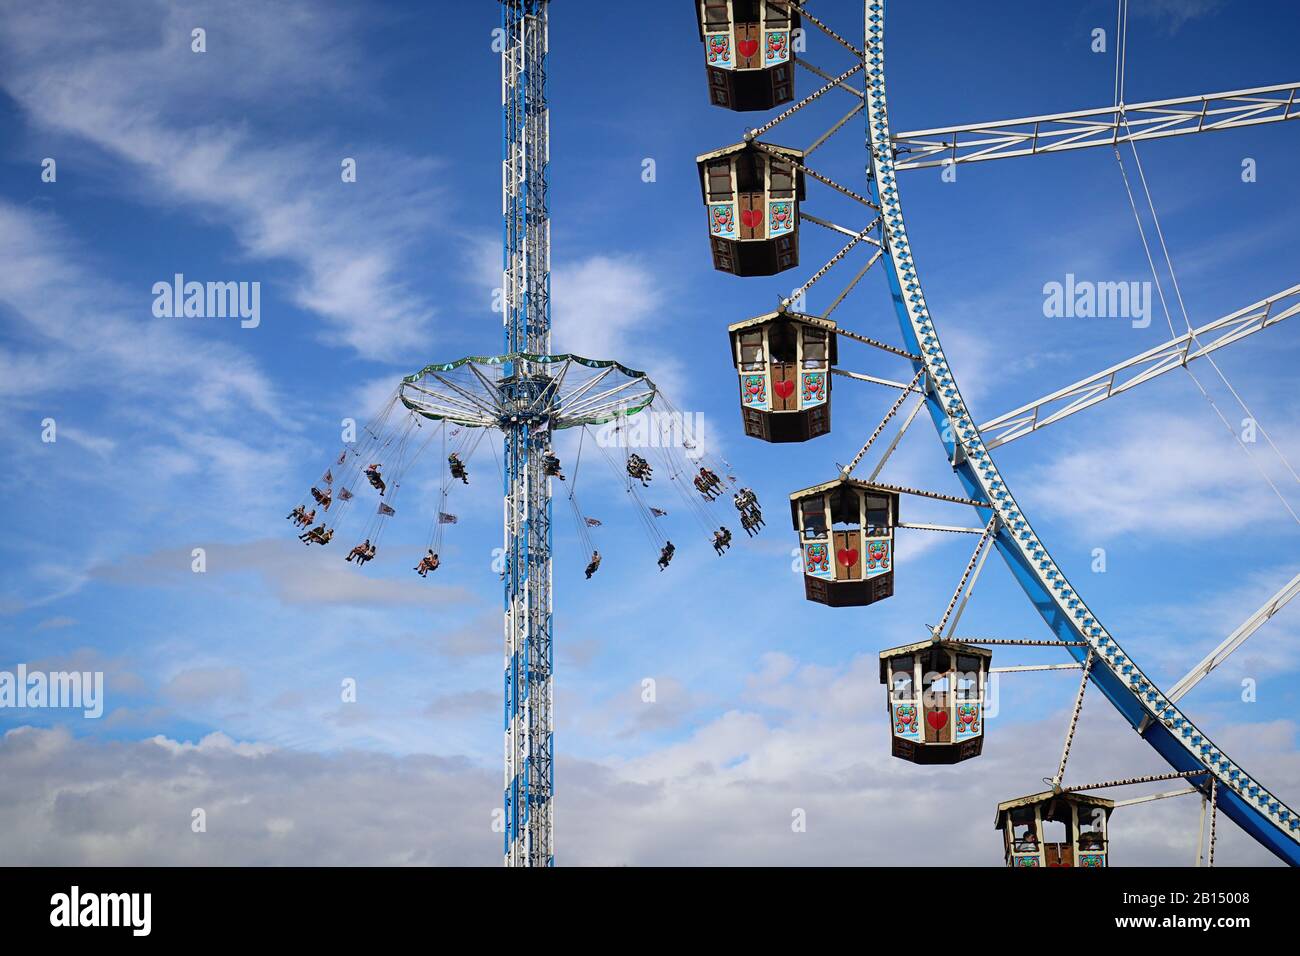 MUNICH, GERMANY - OCTOBER 1, 2019 Giant ferris wheel with Bavarian style booths and free fall ride at the Oktoberfest in Munich Stock Photo